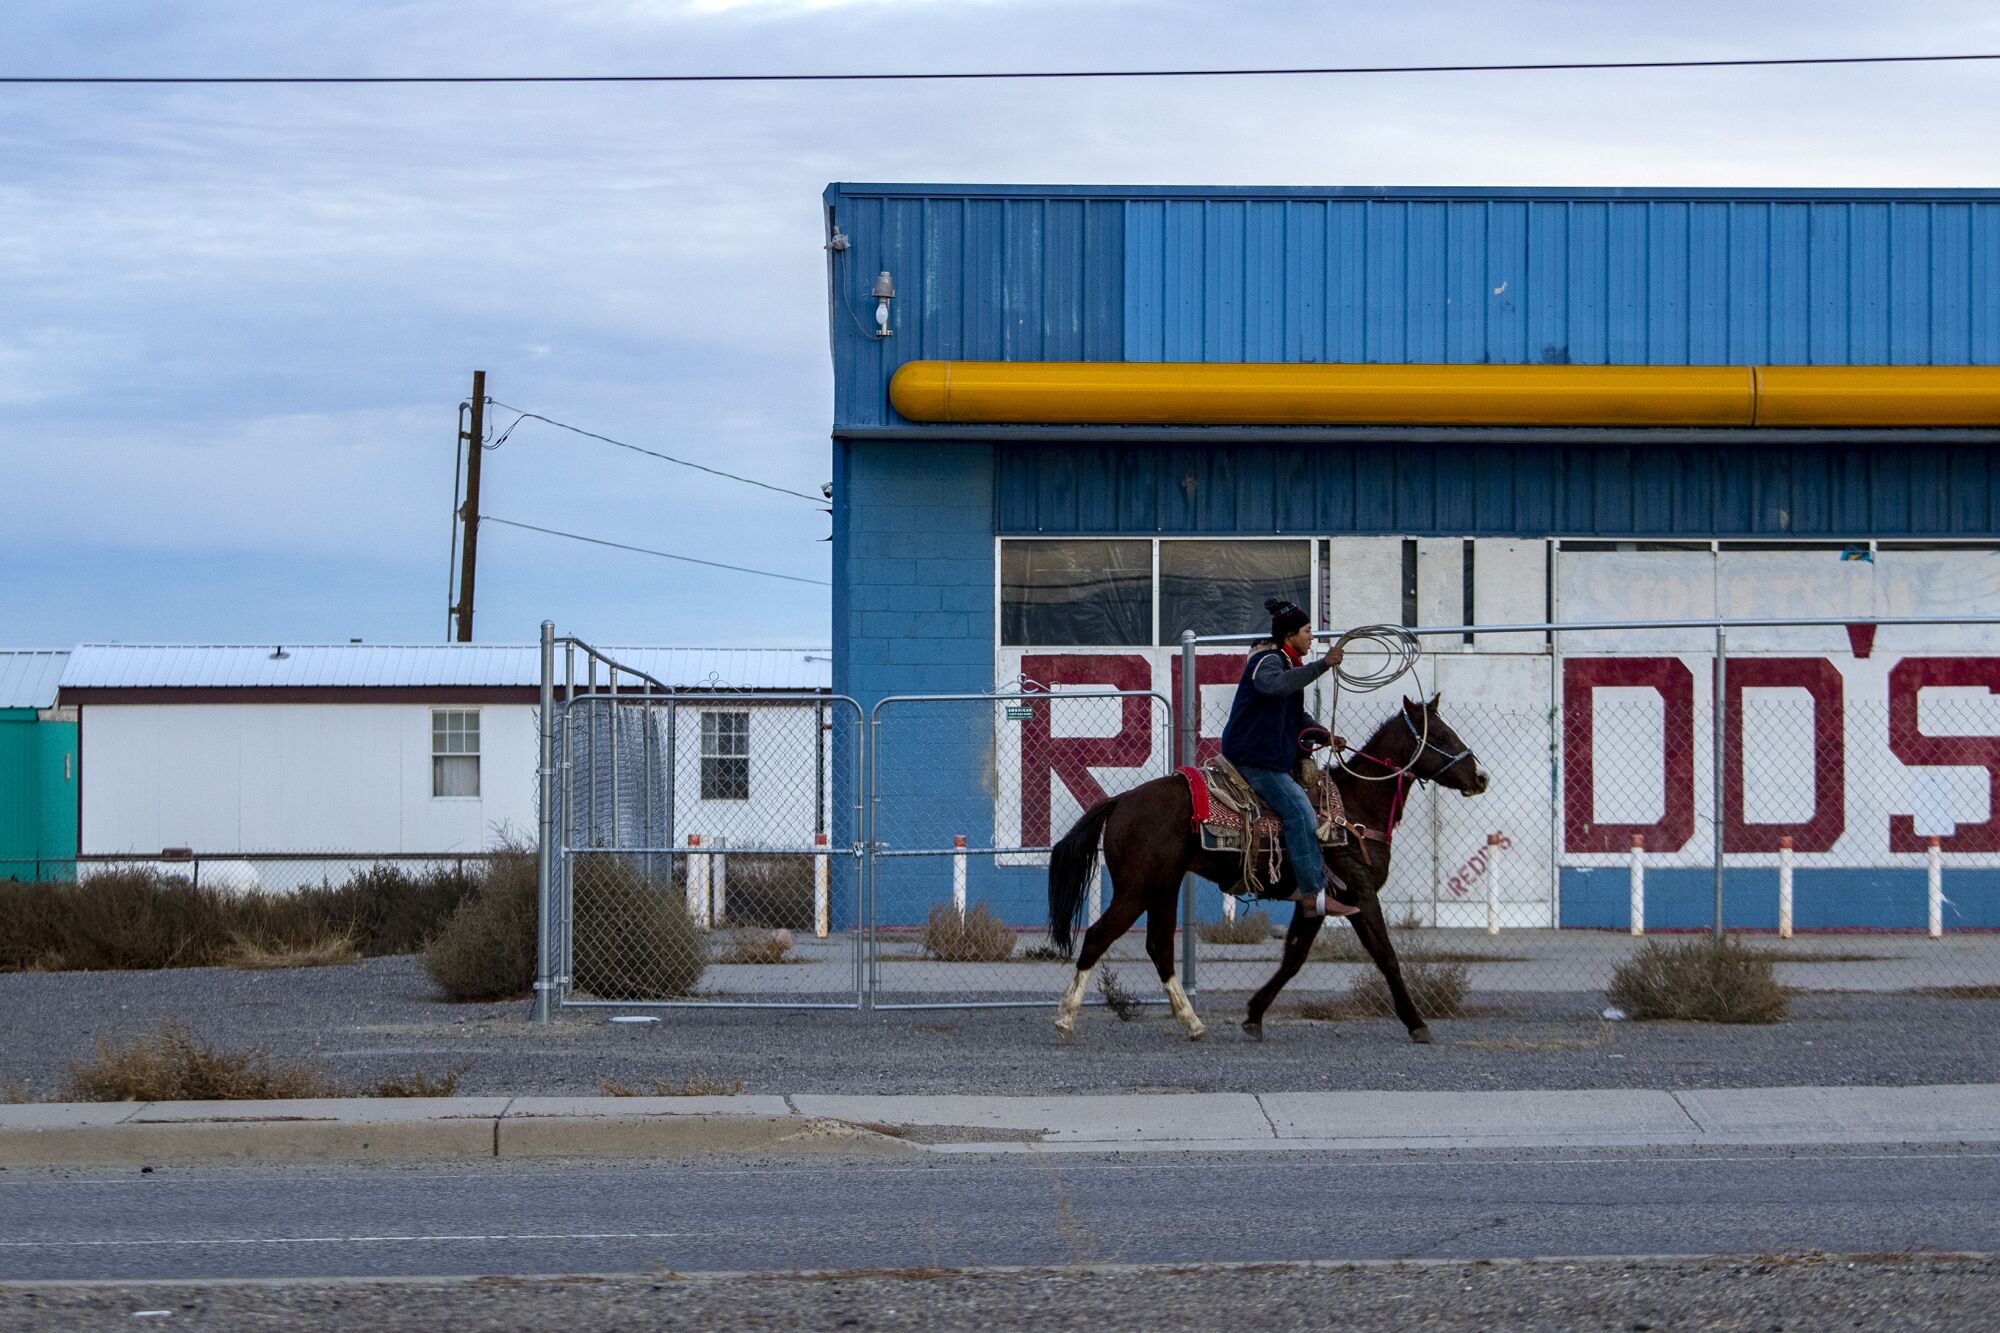 A man carrying a rope rides through a town on a horse in Navajo Nation.  